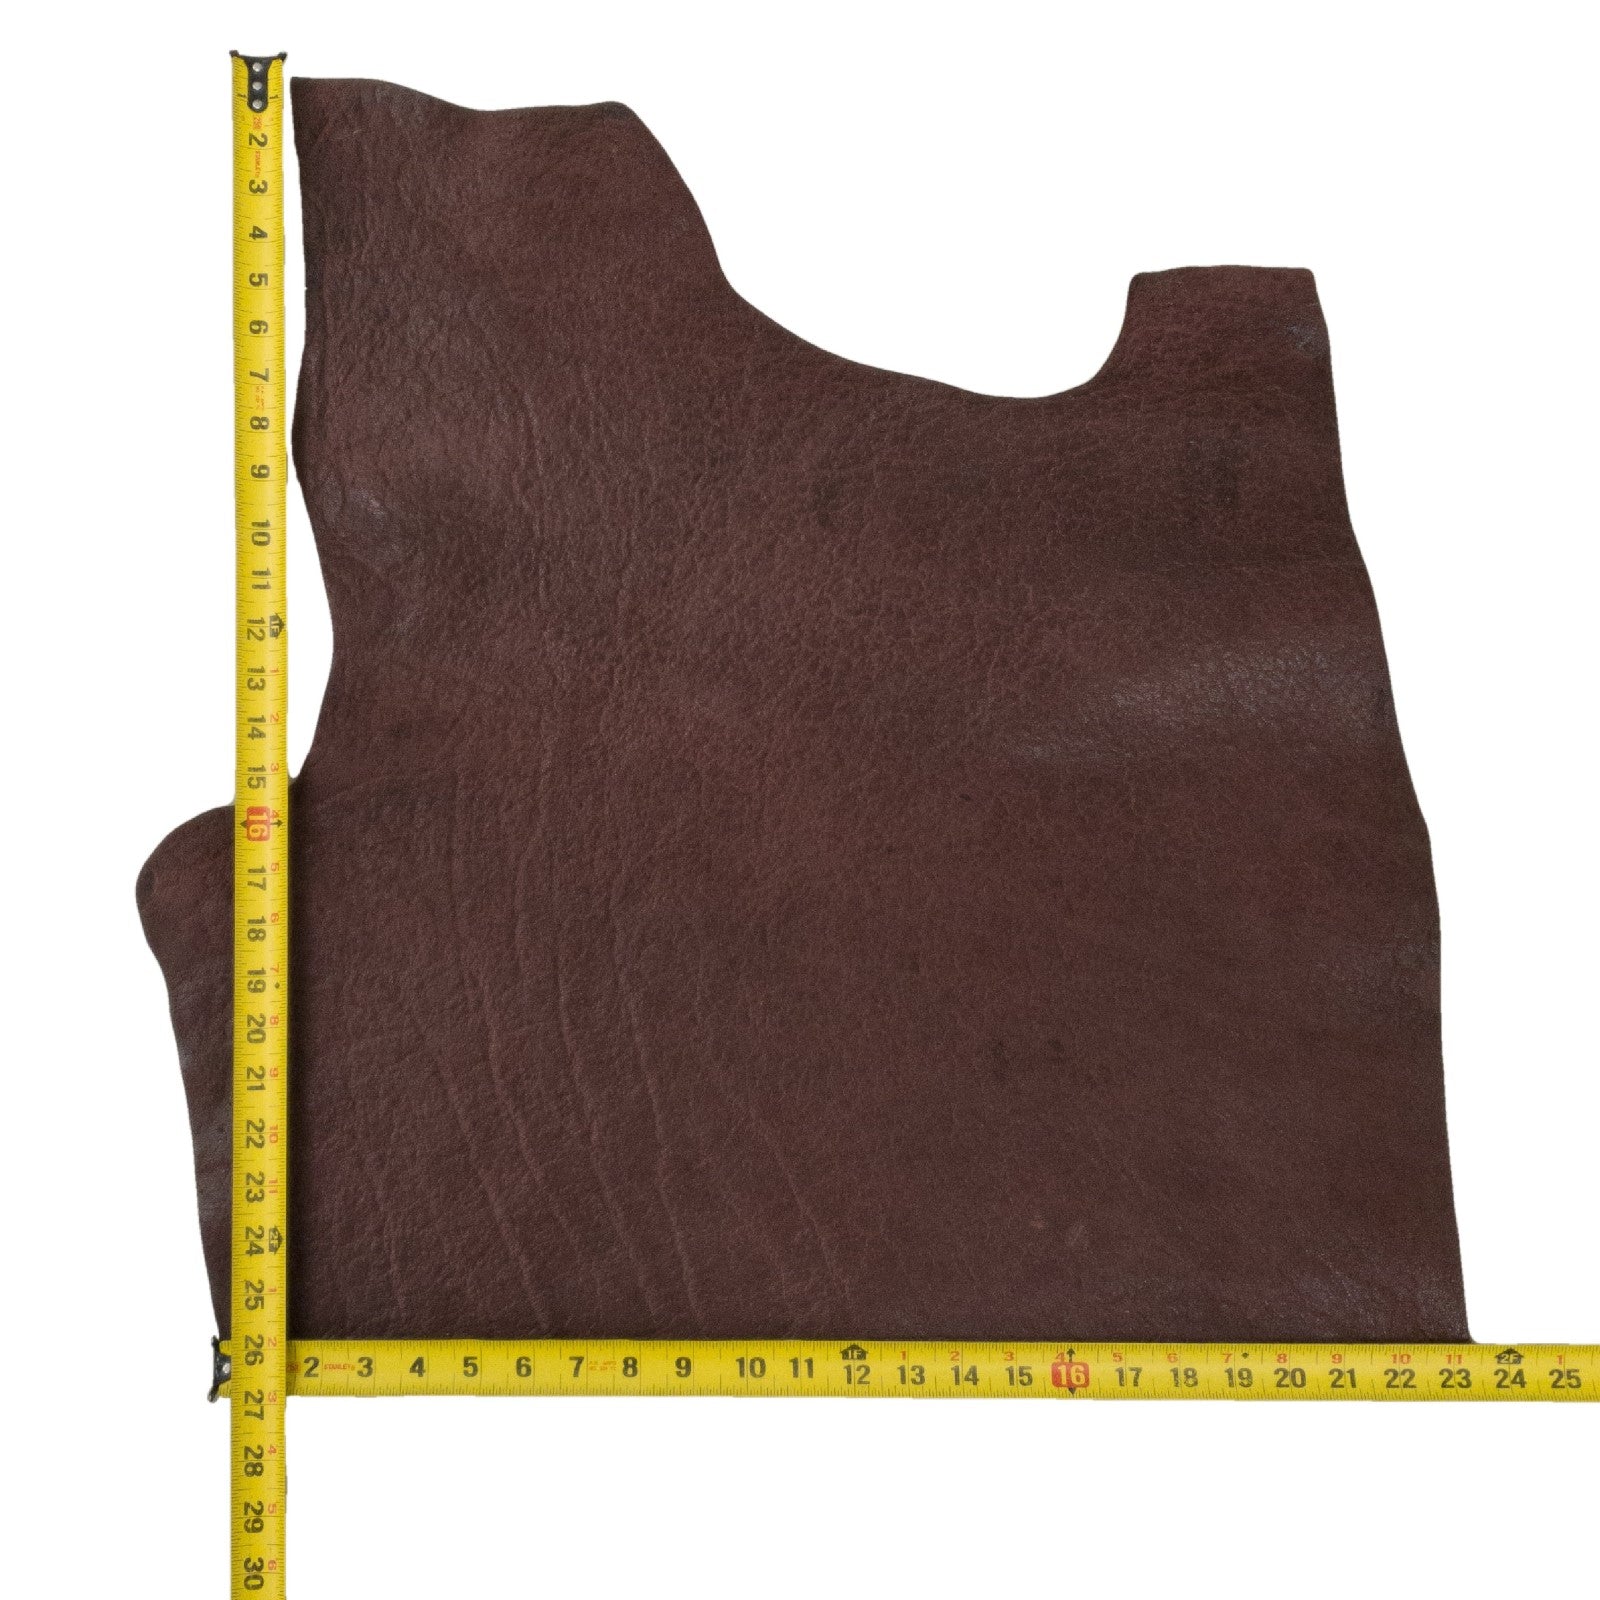 Russet Rain Forest Brown, 4-5 oz, 2-3 Sq Ft, Genuine Elephant Hides, 3 / Hide 3 | The Leather Guy